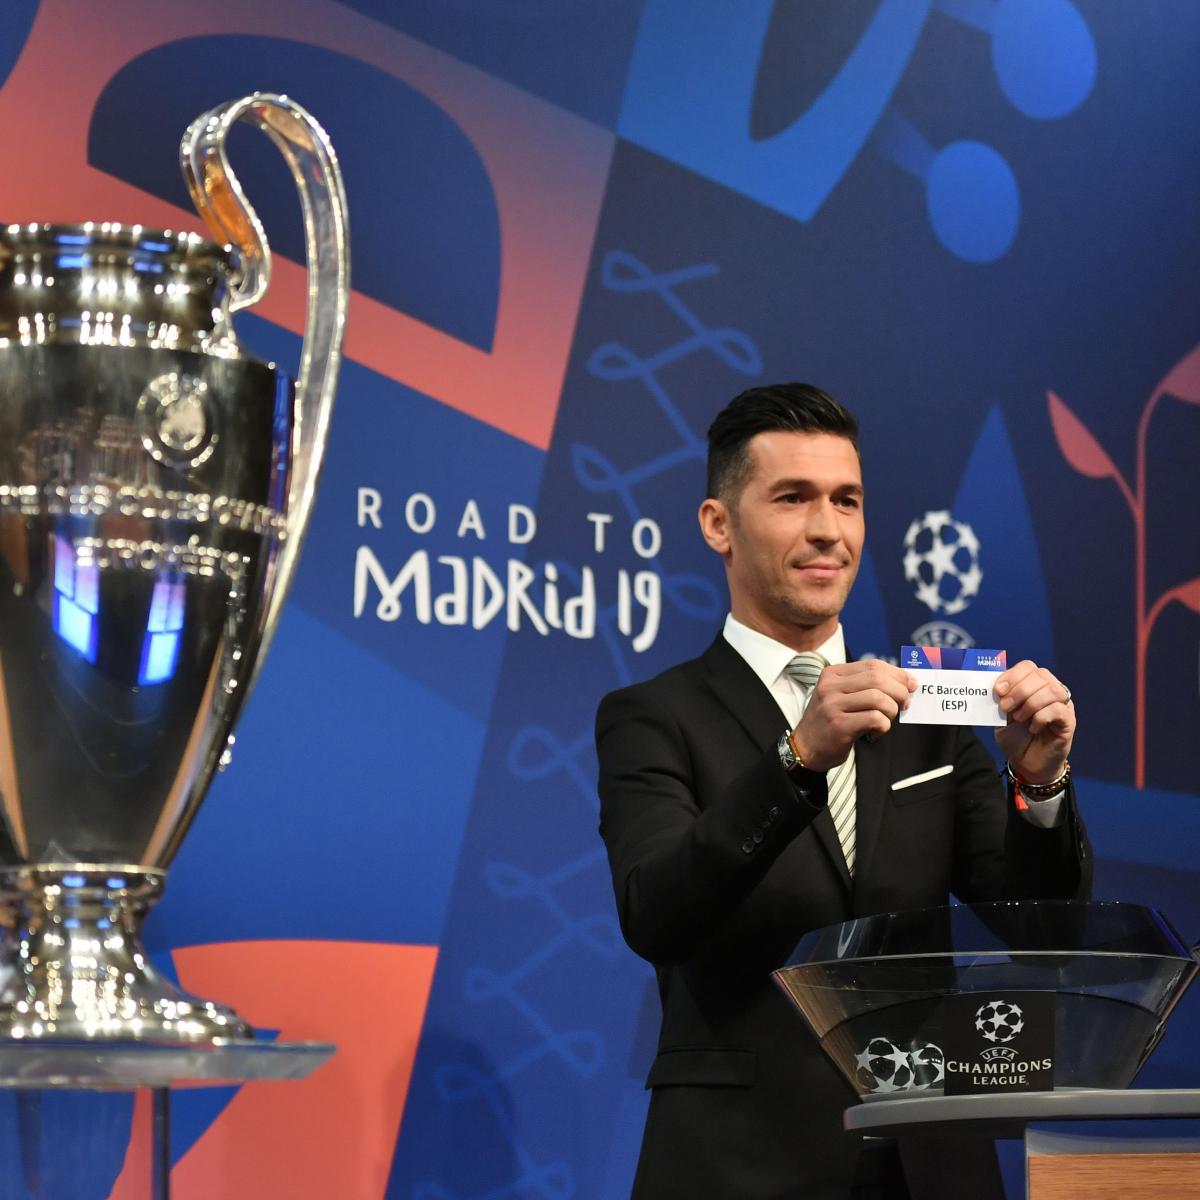 Champions League quarterfinals draw: Who is playing who and when